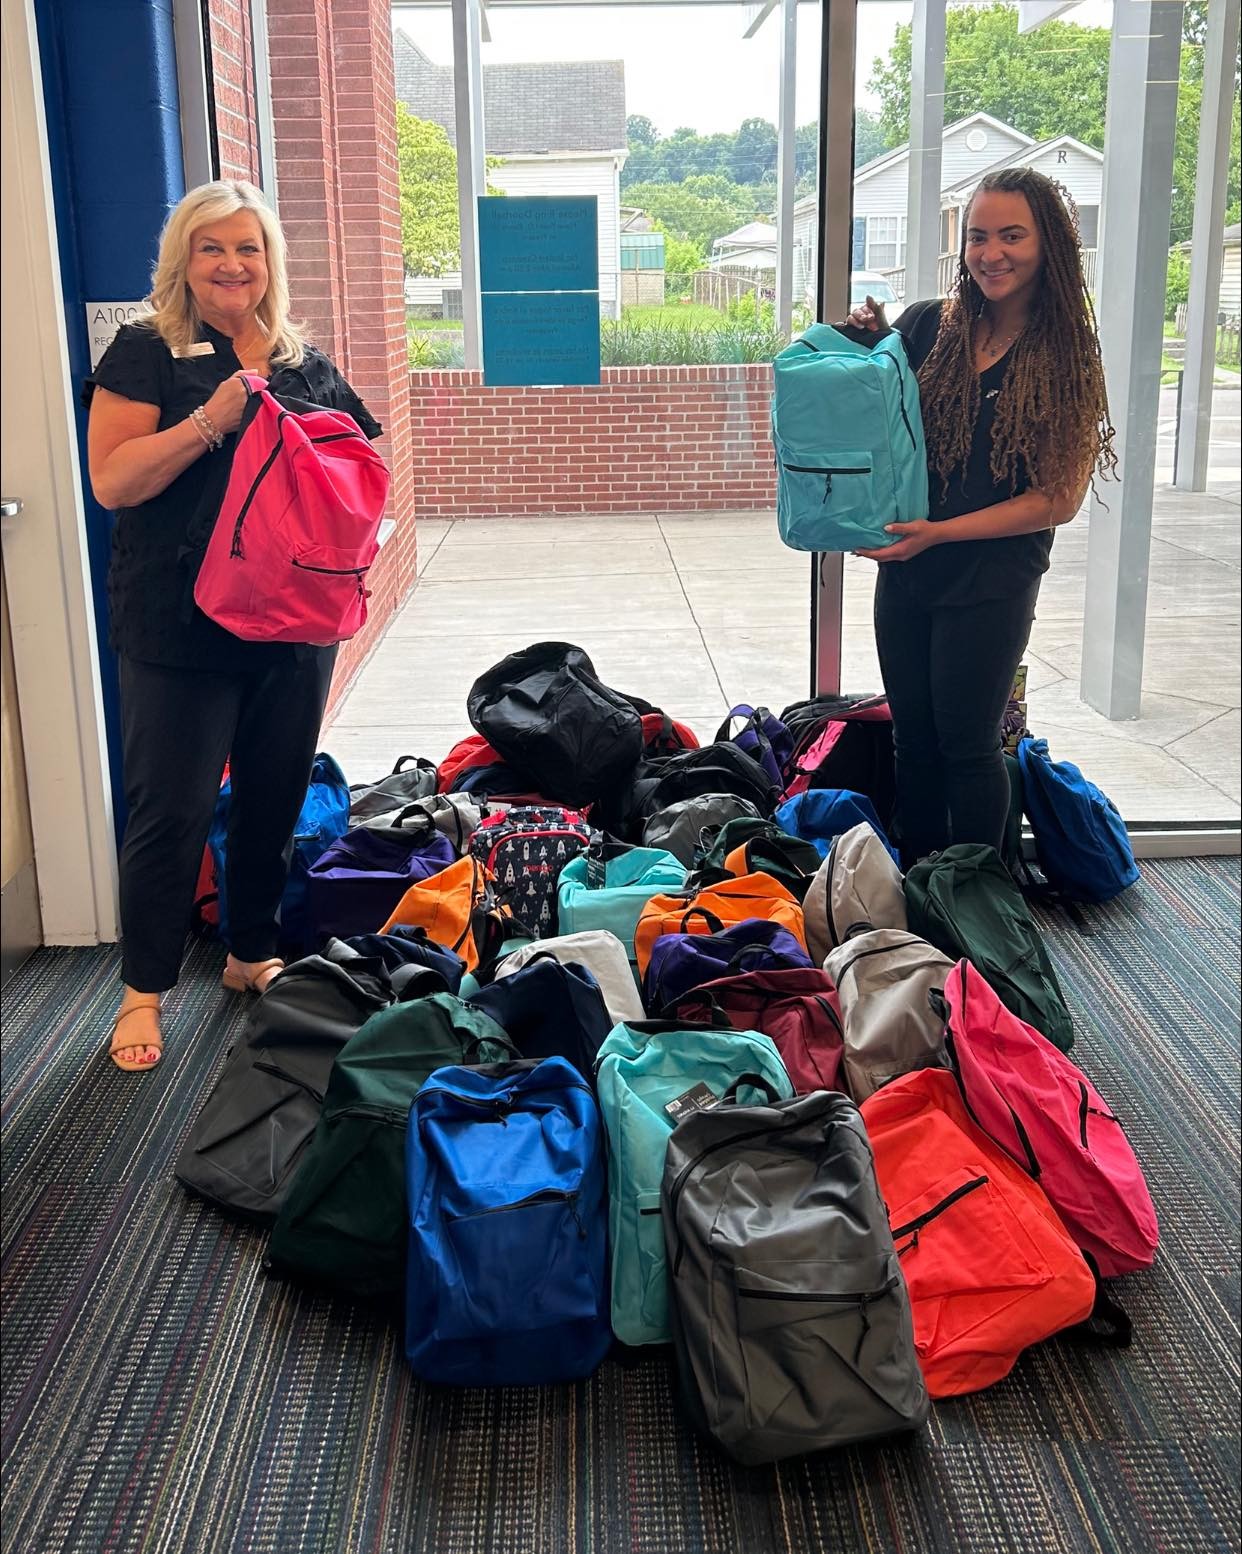 Aventine Northshore's Fill-The-Backpacks Campaign
These filled backpacks went to first graders.